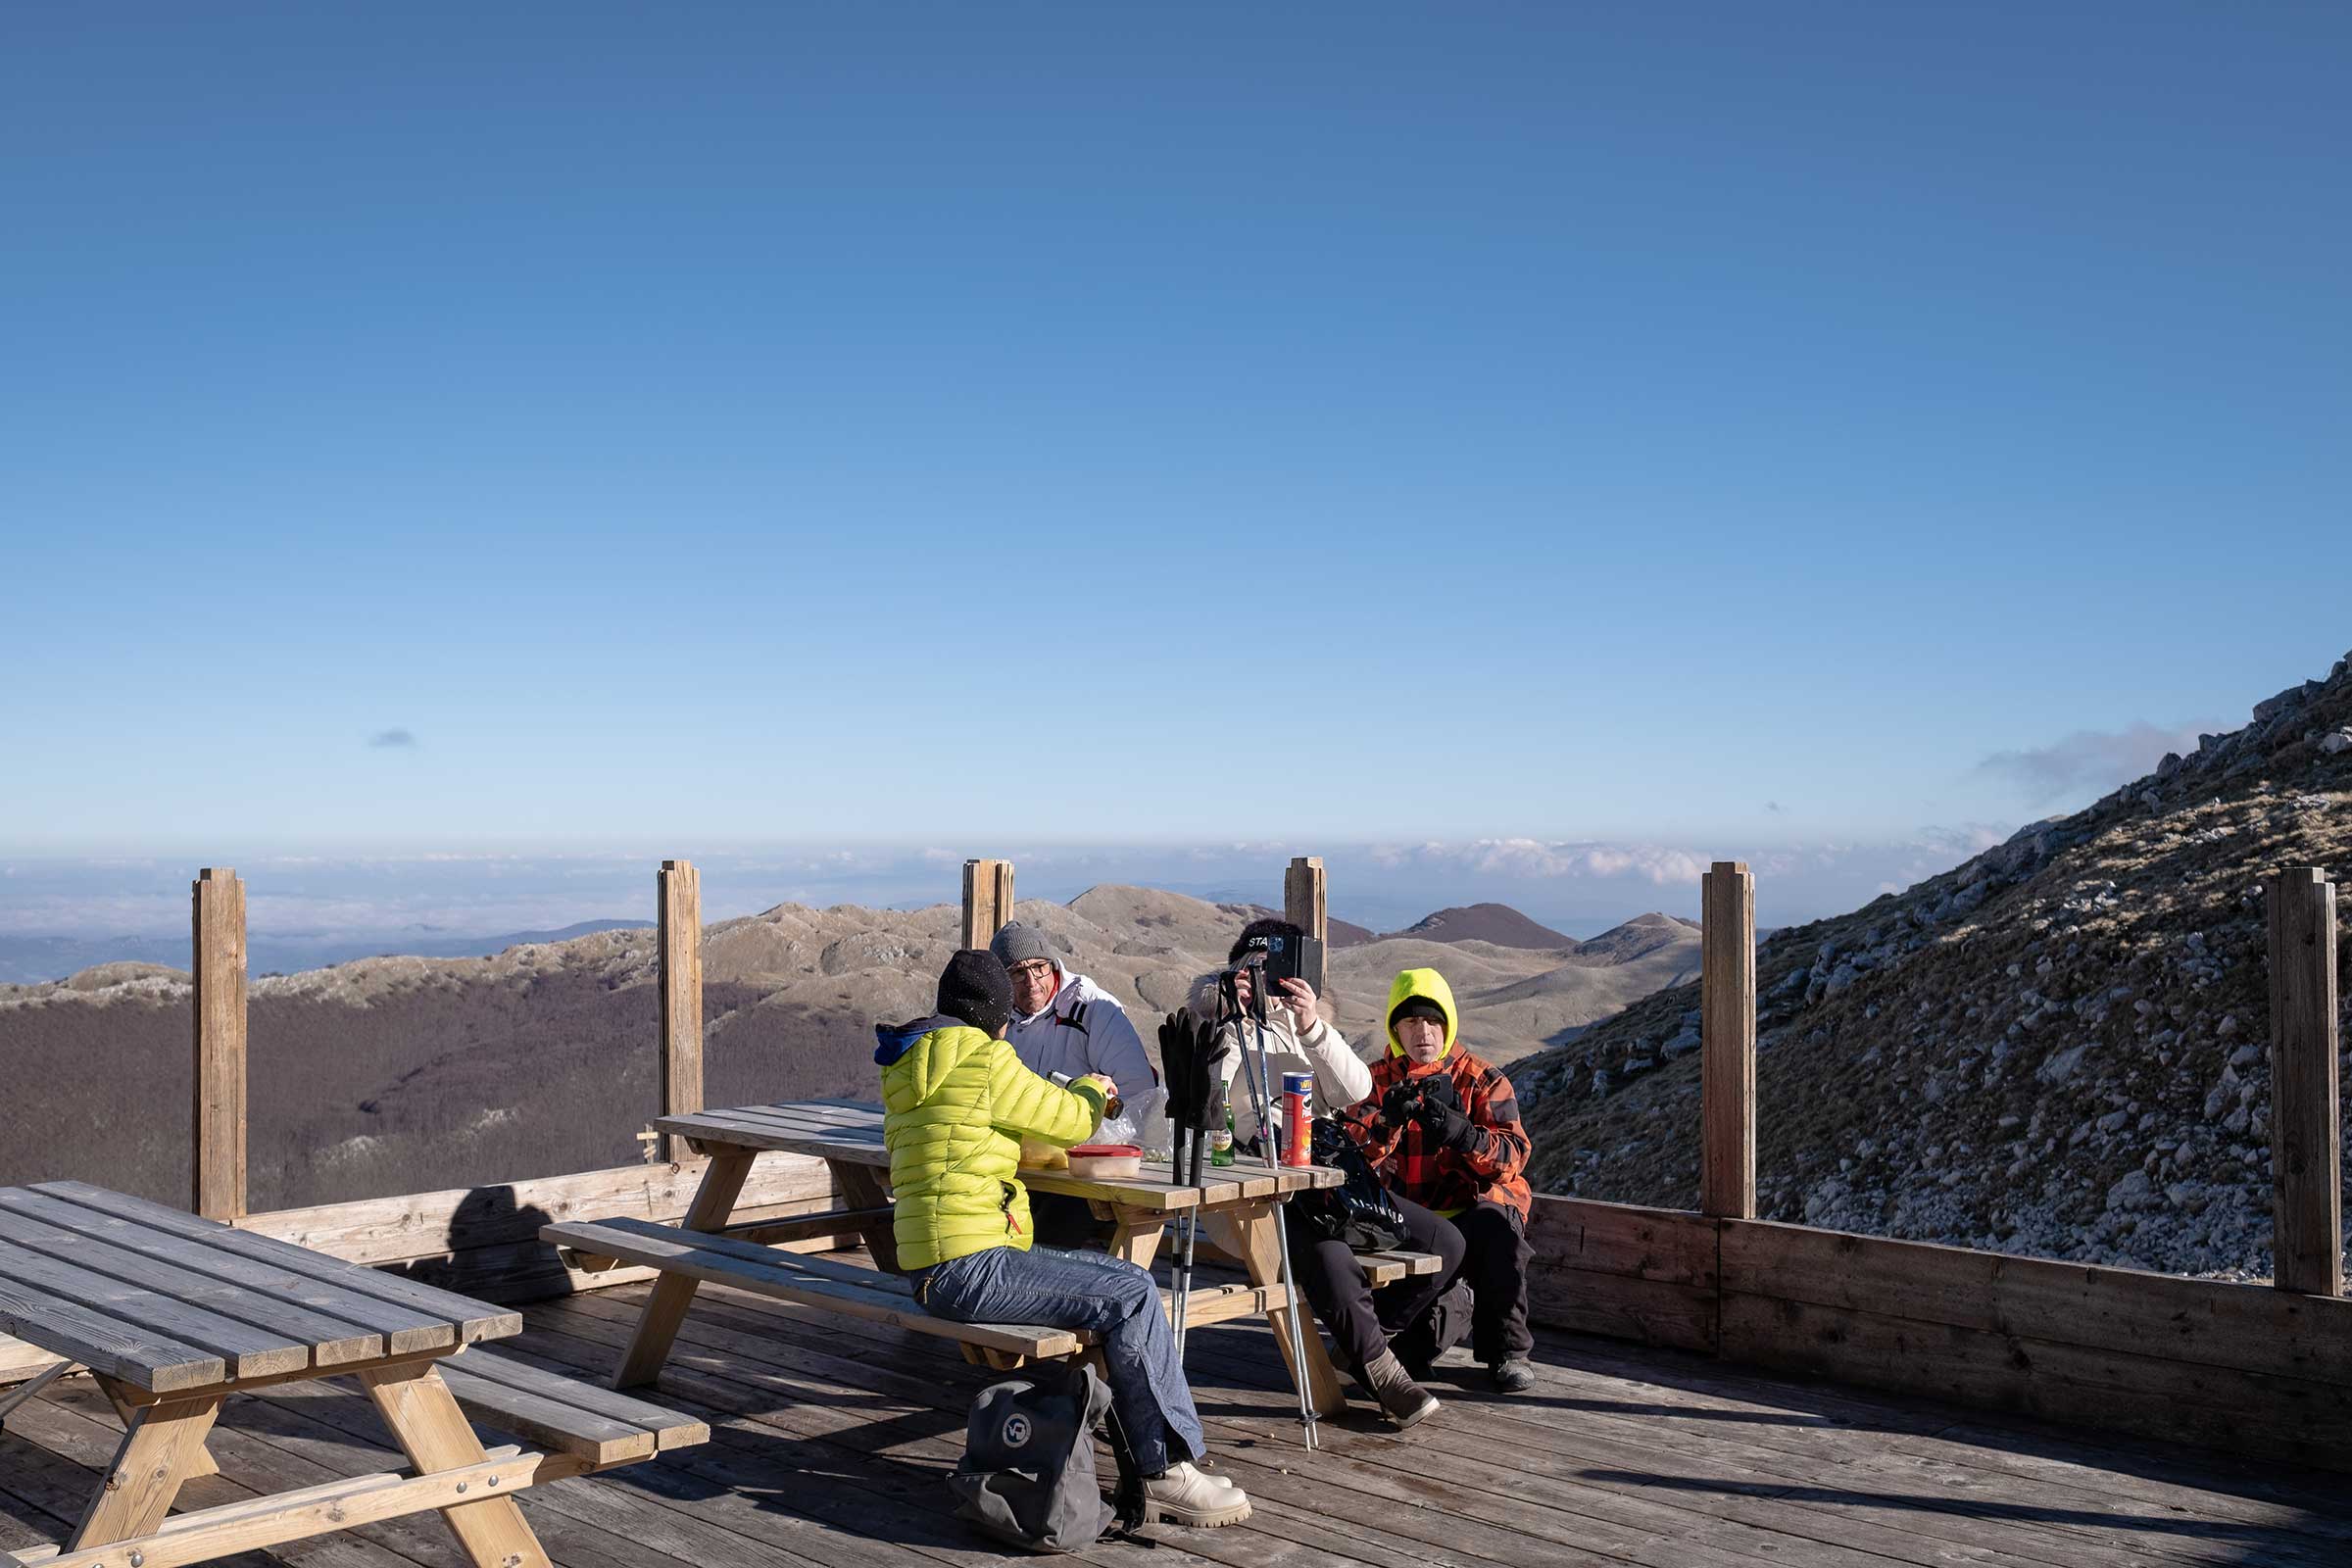 Visitors eat lunch at the top of a snowless Mount Miletto in Italy. (Manuel Dorati)